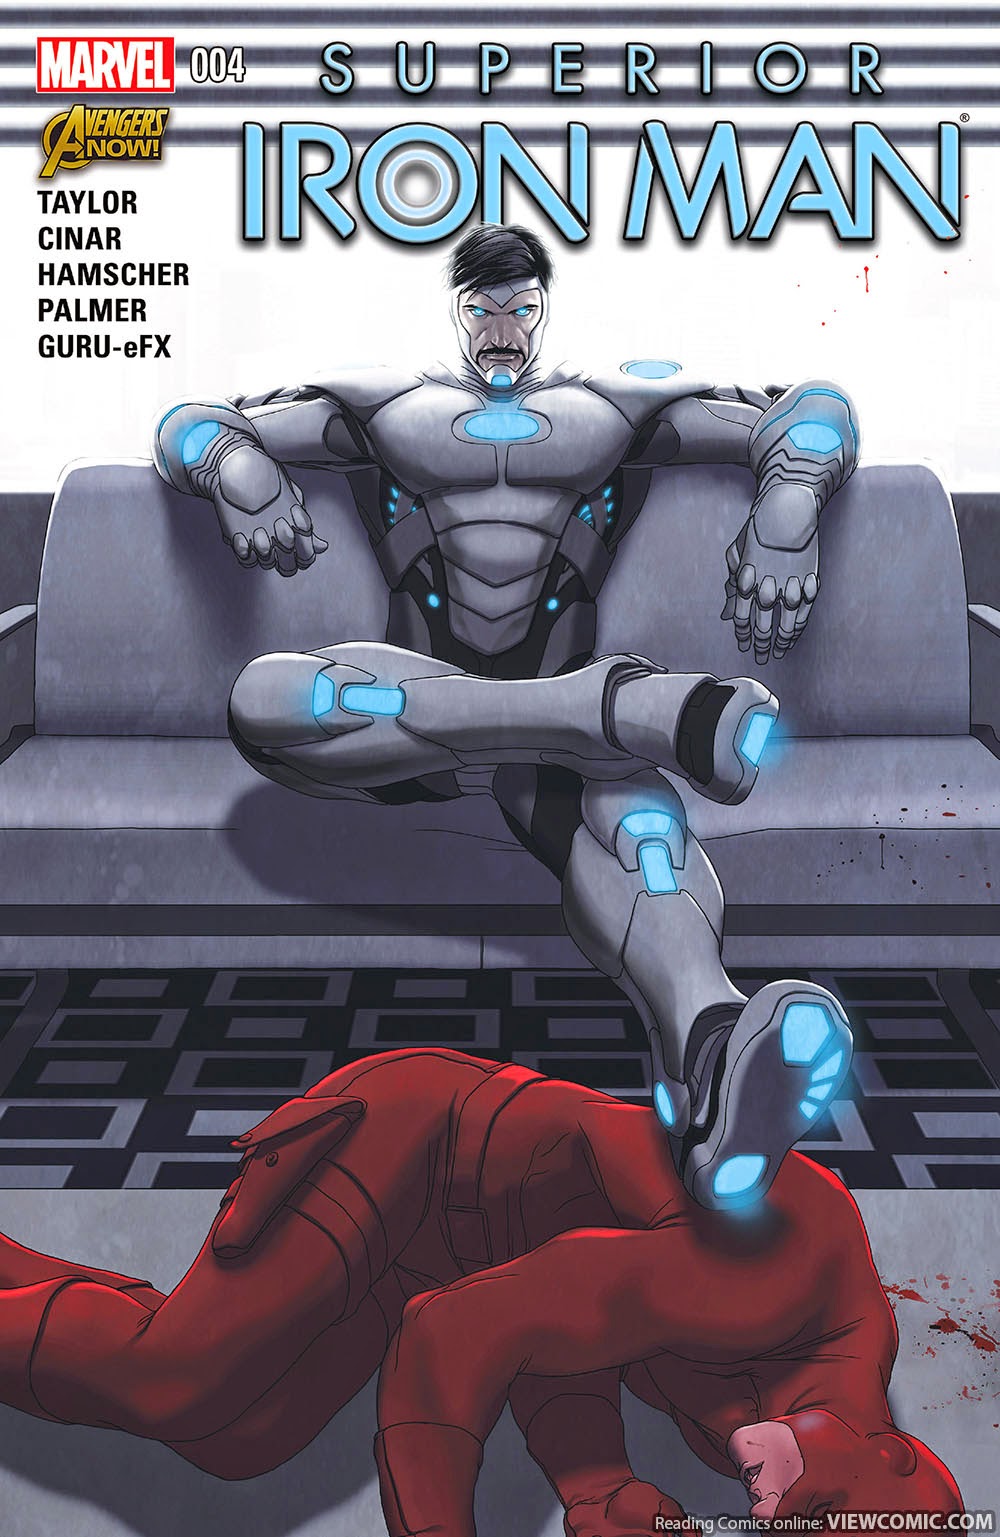 Iron Man - Superior Iron Man 004 2015 | Read Superior Iron Man 004 2015 comic online  in high quality. Read Full Comic online for free - Read comics online in  high quality .| READ COMIC ONLINE